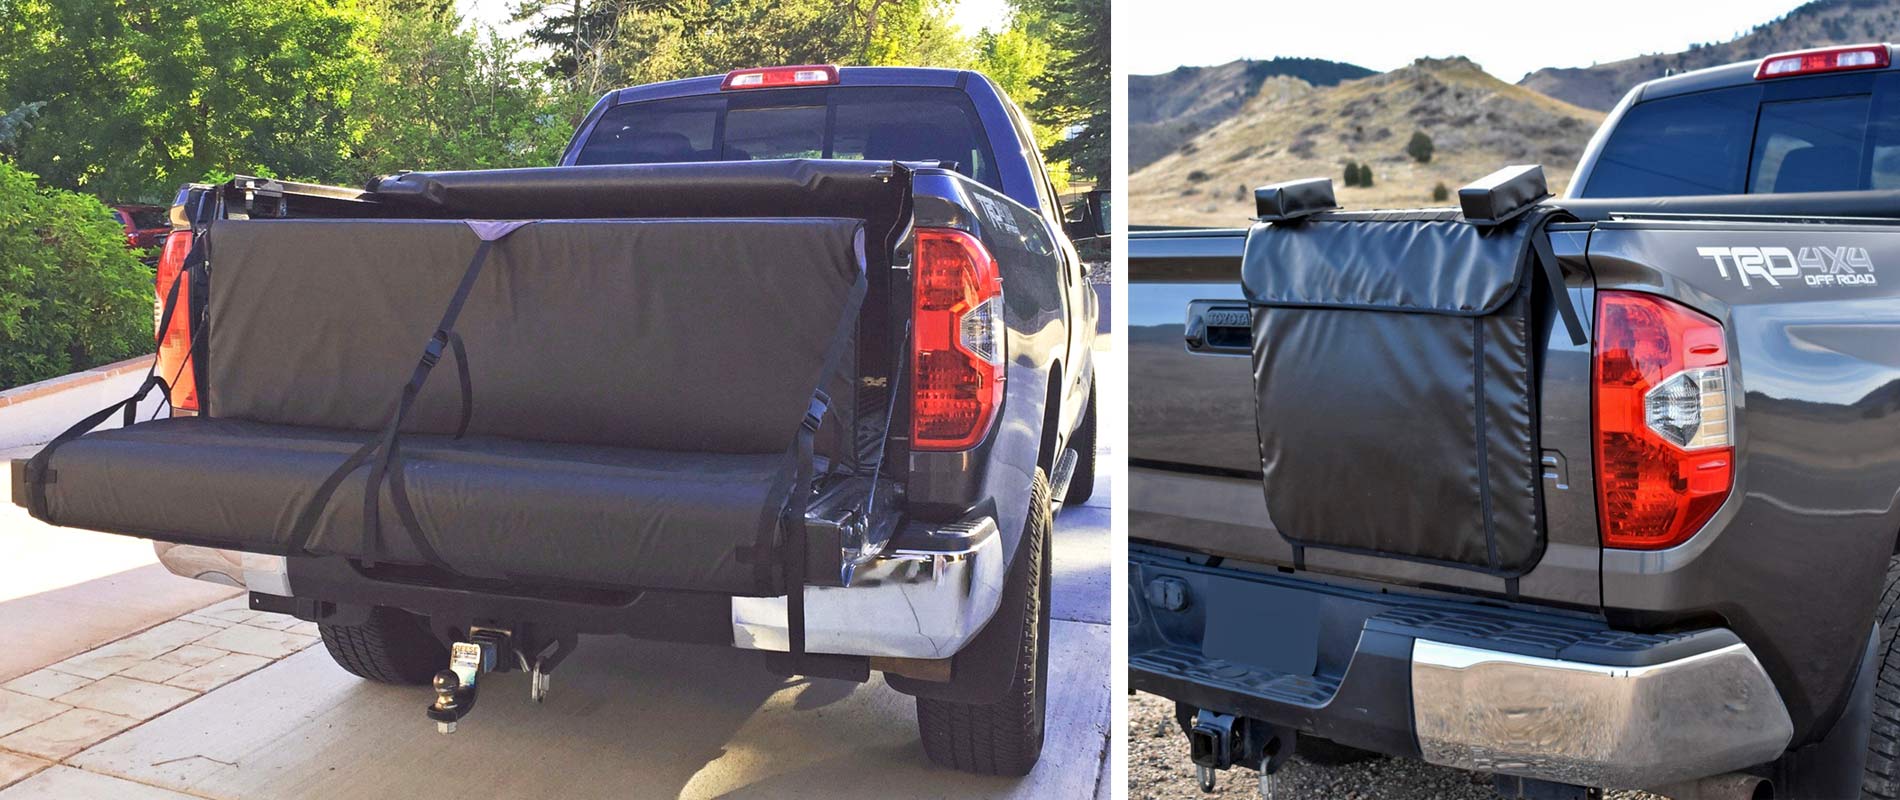 SwitchBack Tailgate Pads for trucks, with built-in seating